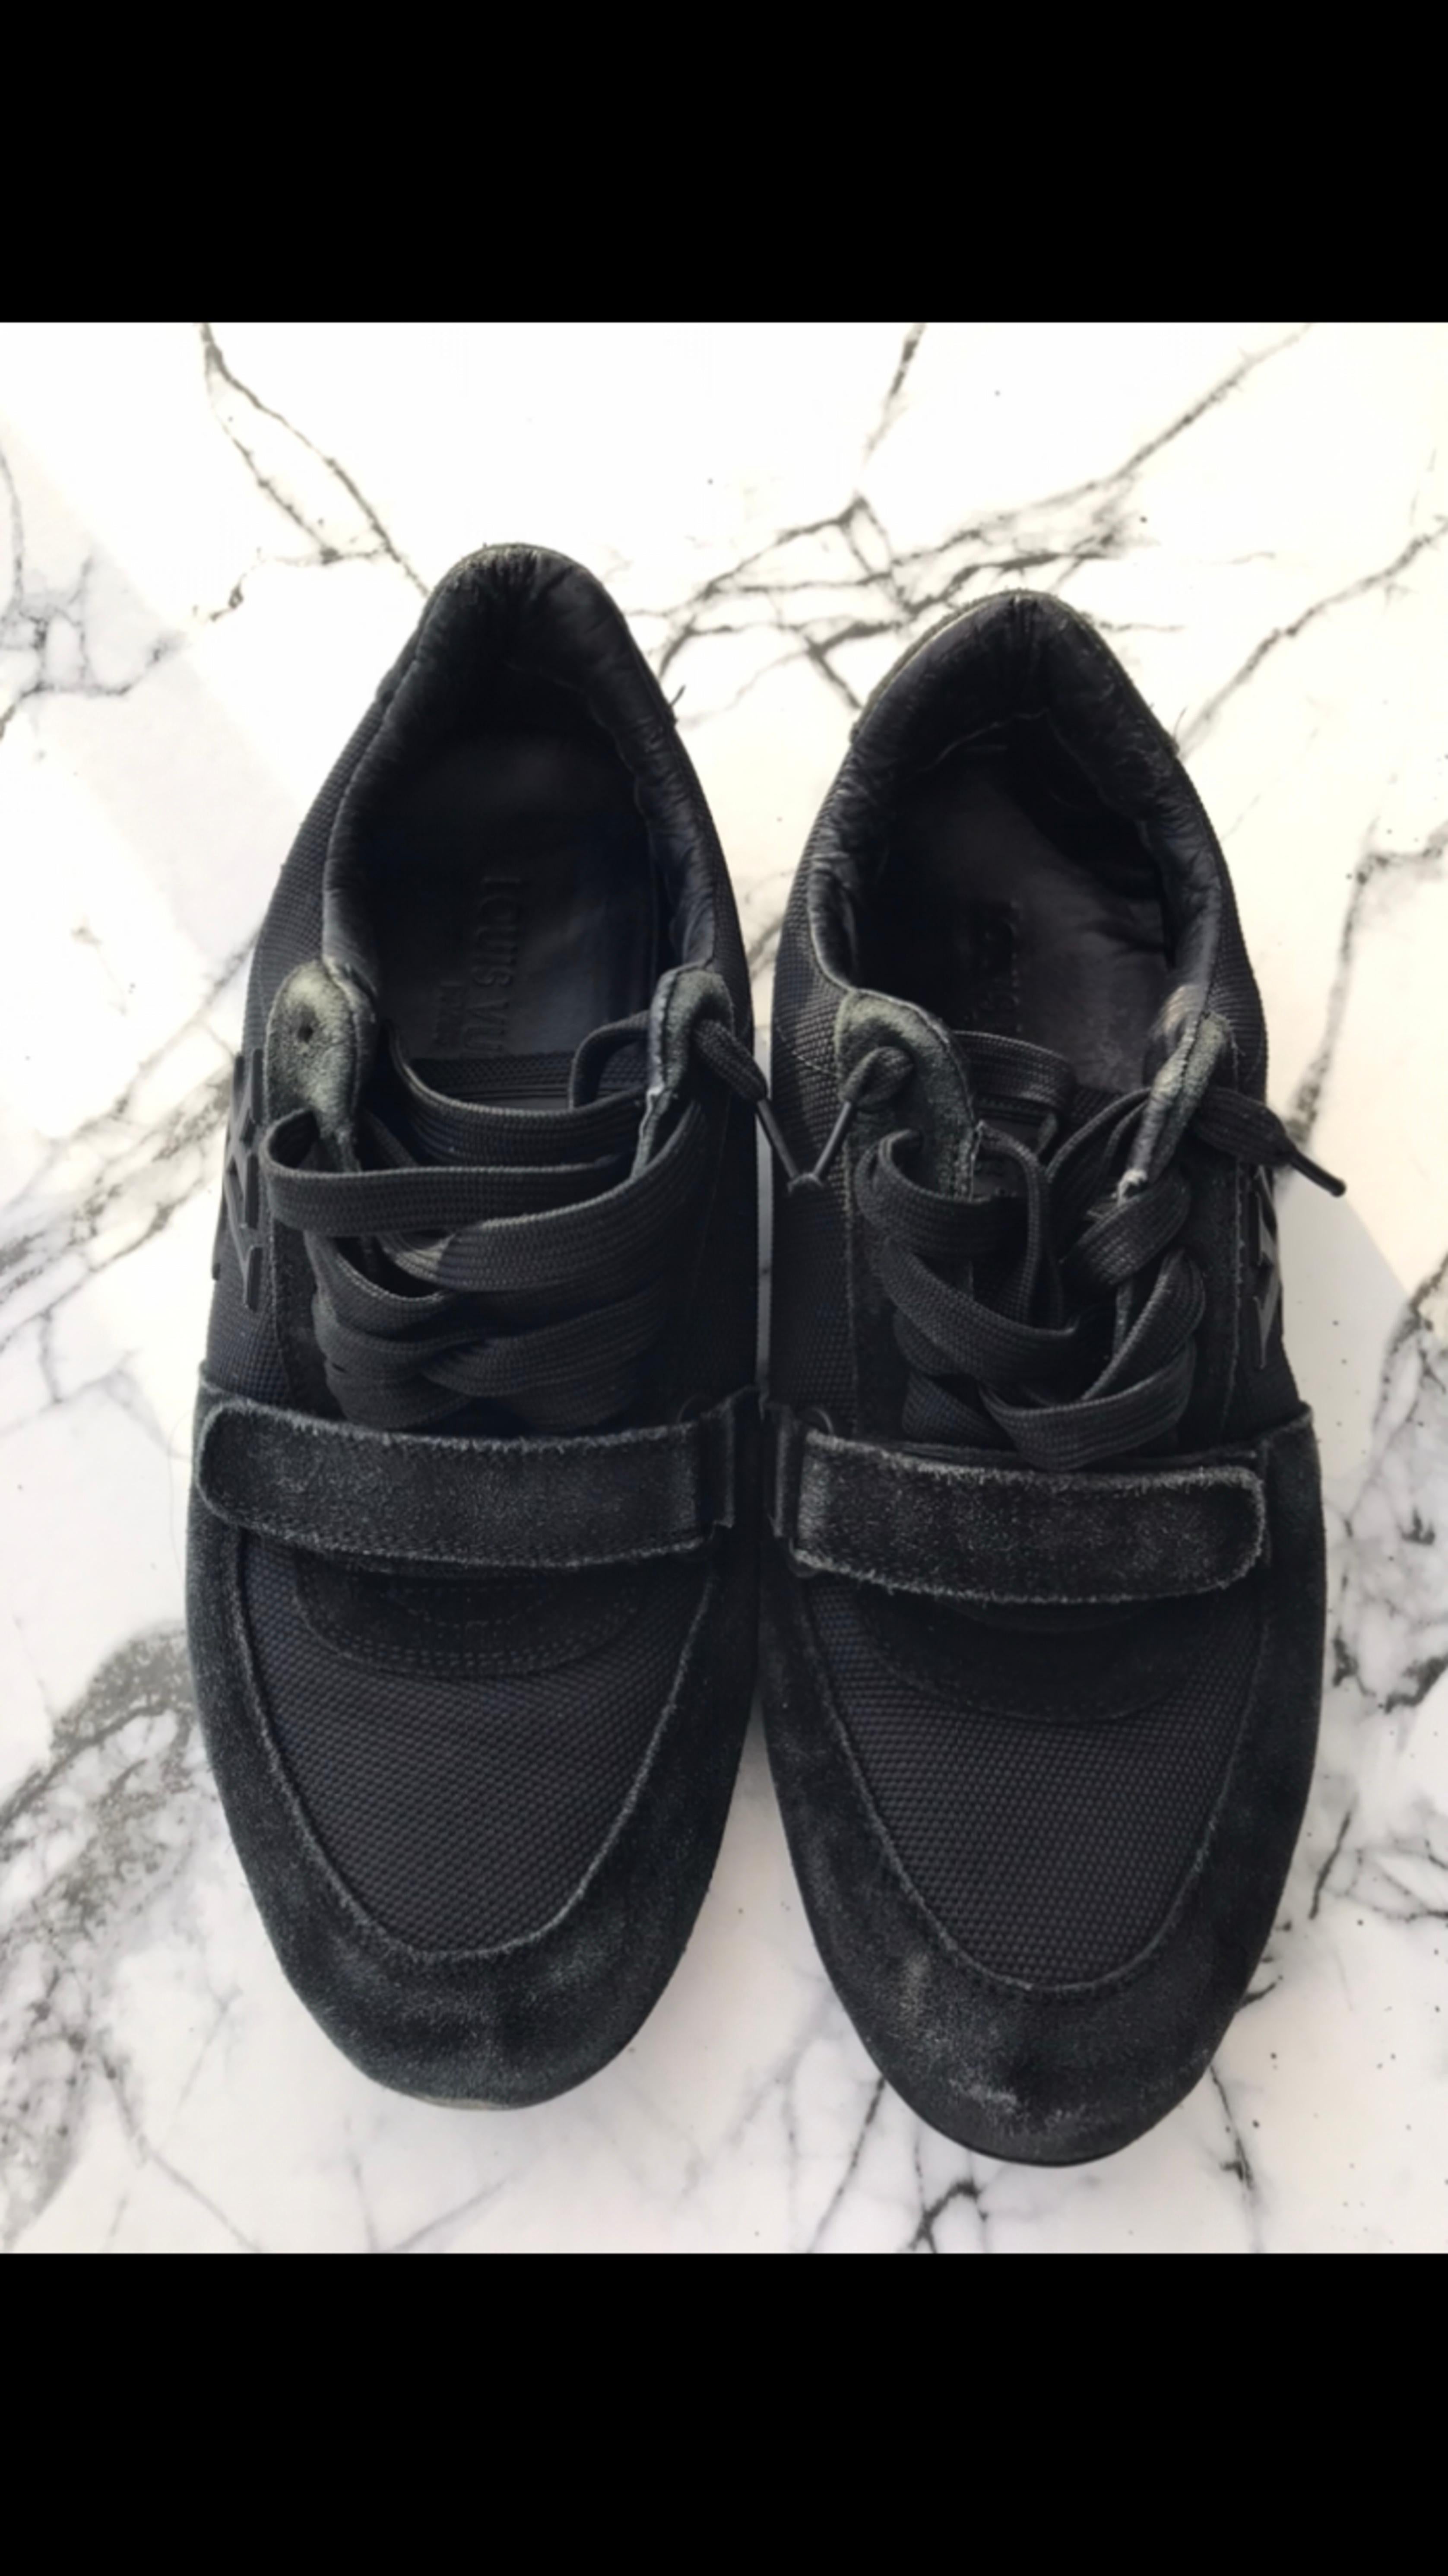 Louis Vuitton sneakers are made of suede, black, were previously used, size 40 European in one of the photos it is visible on the tongue, in the photo I tried to reflect the condition of this product